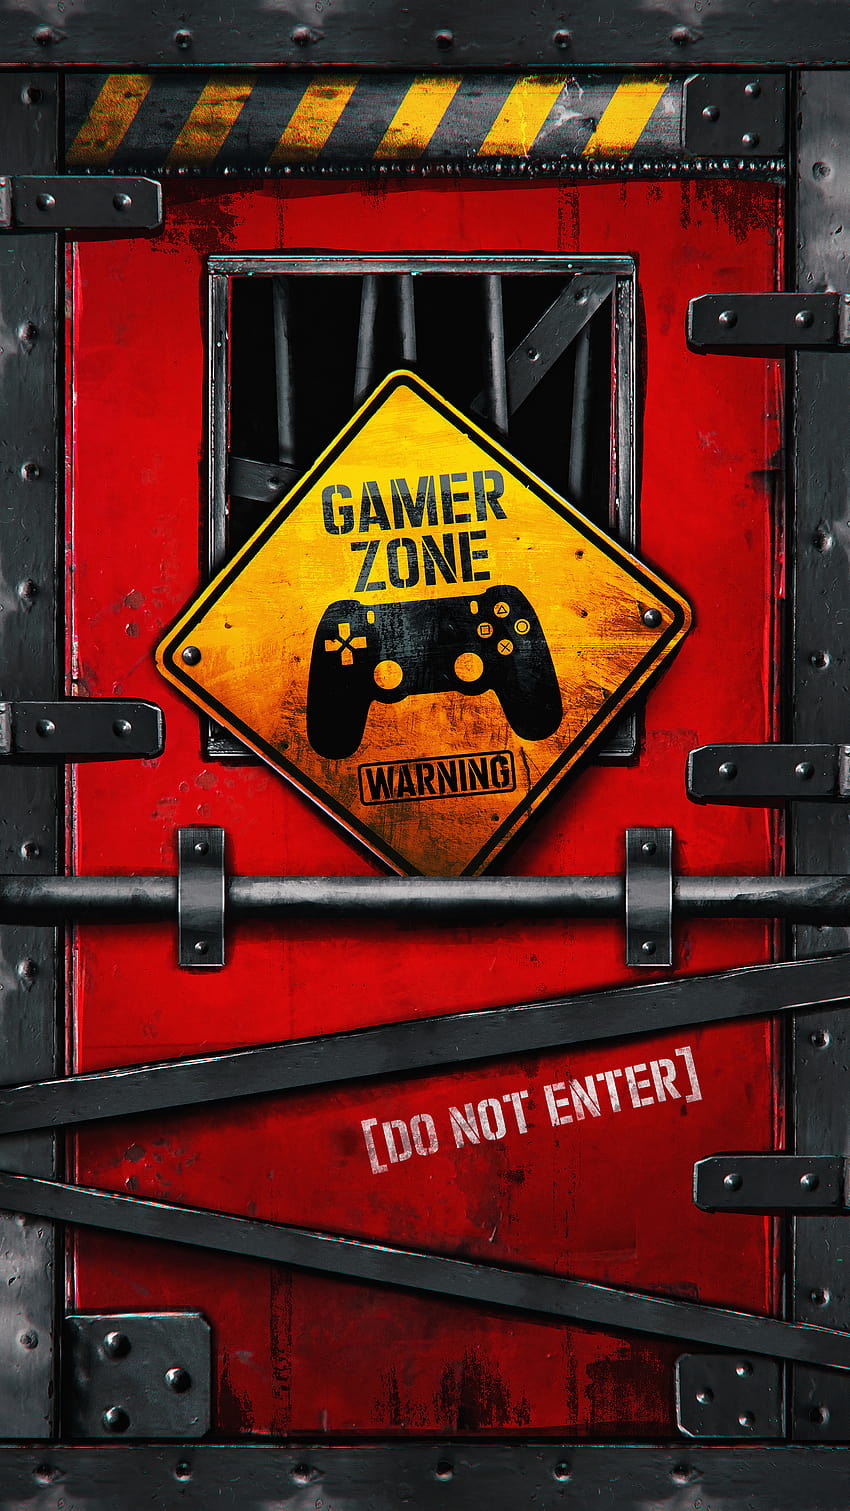 2160x3840 Gamer Zone Sony Xperia X,XZ,Z5 Premium , Backgrounds, and, mobile 2160x3840 gaming HD phone wallpaper